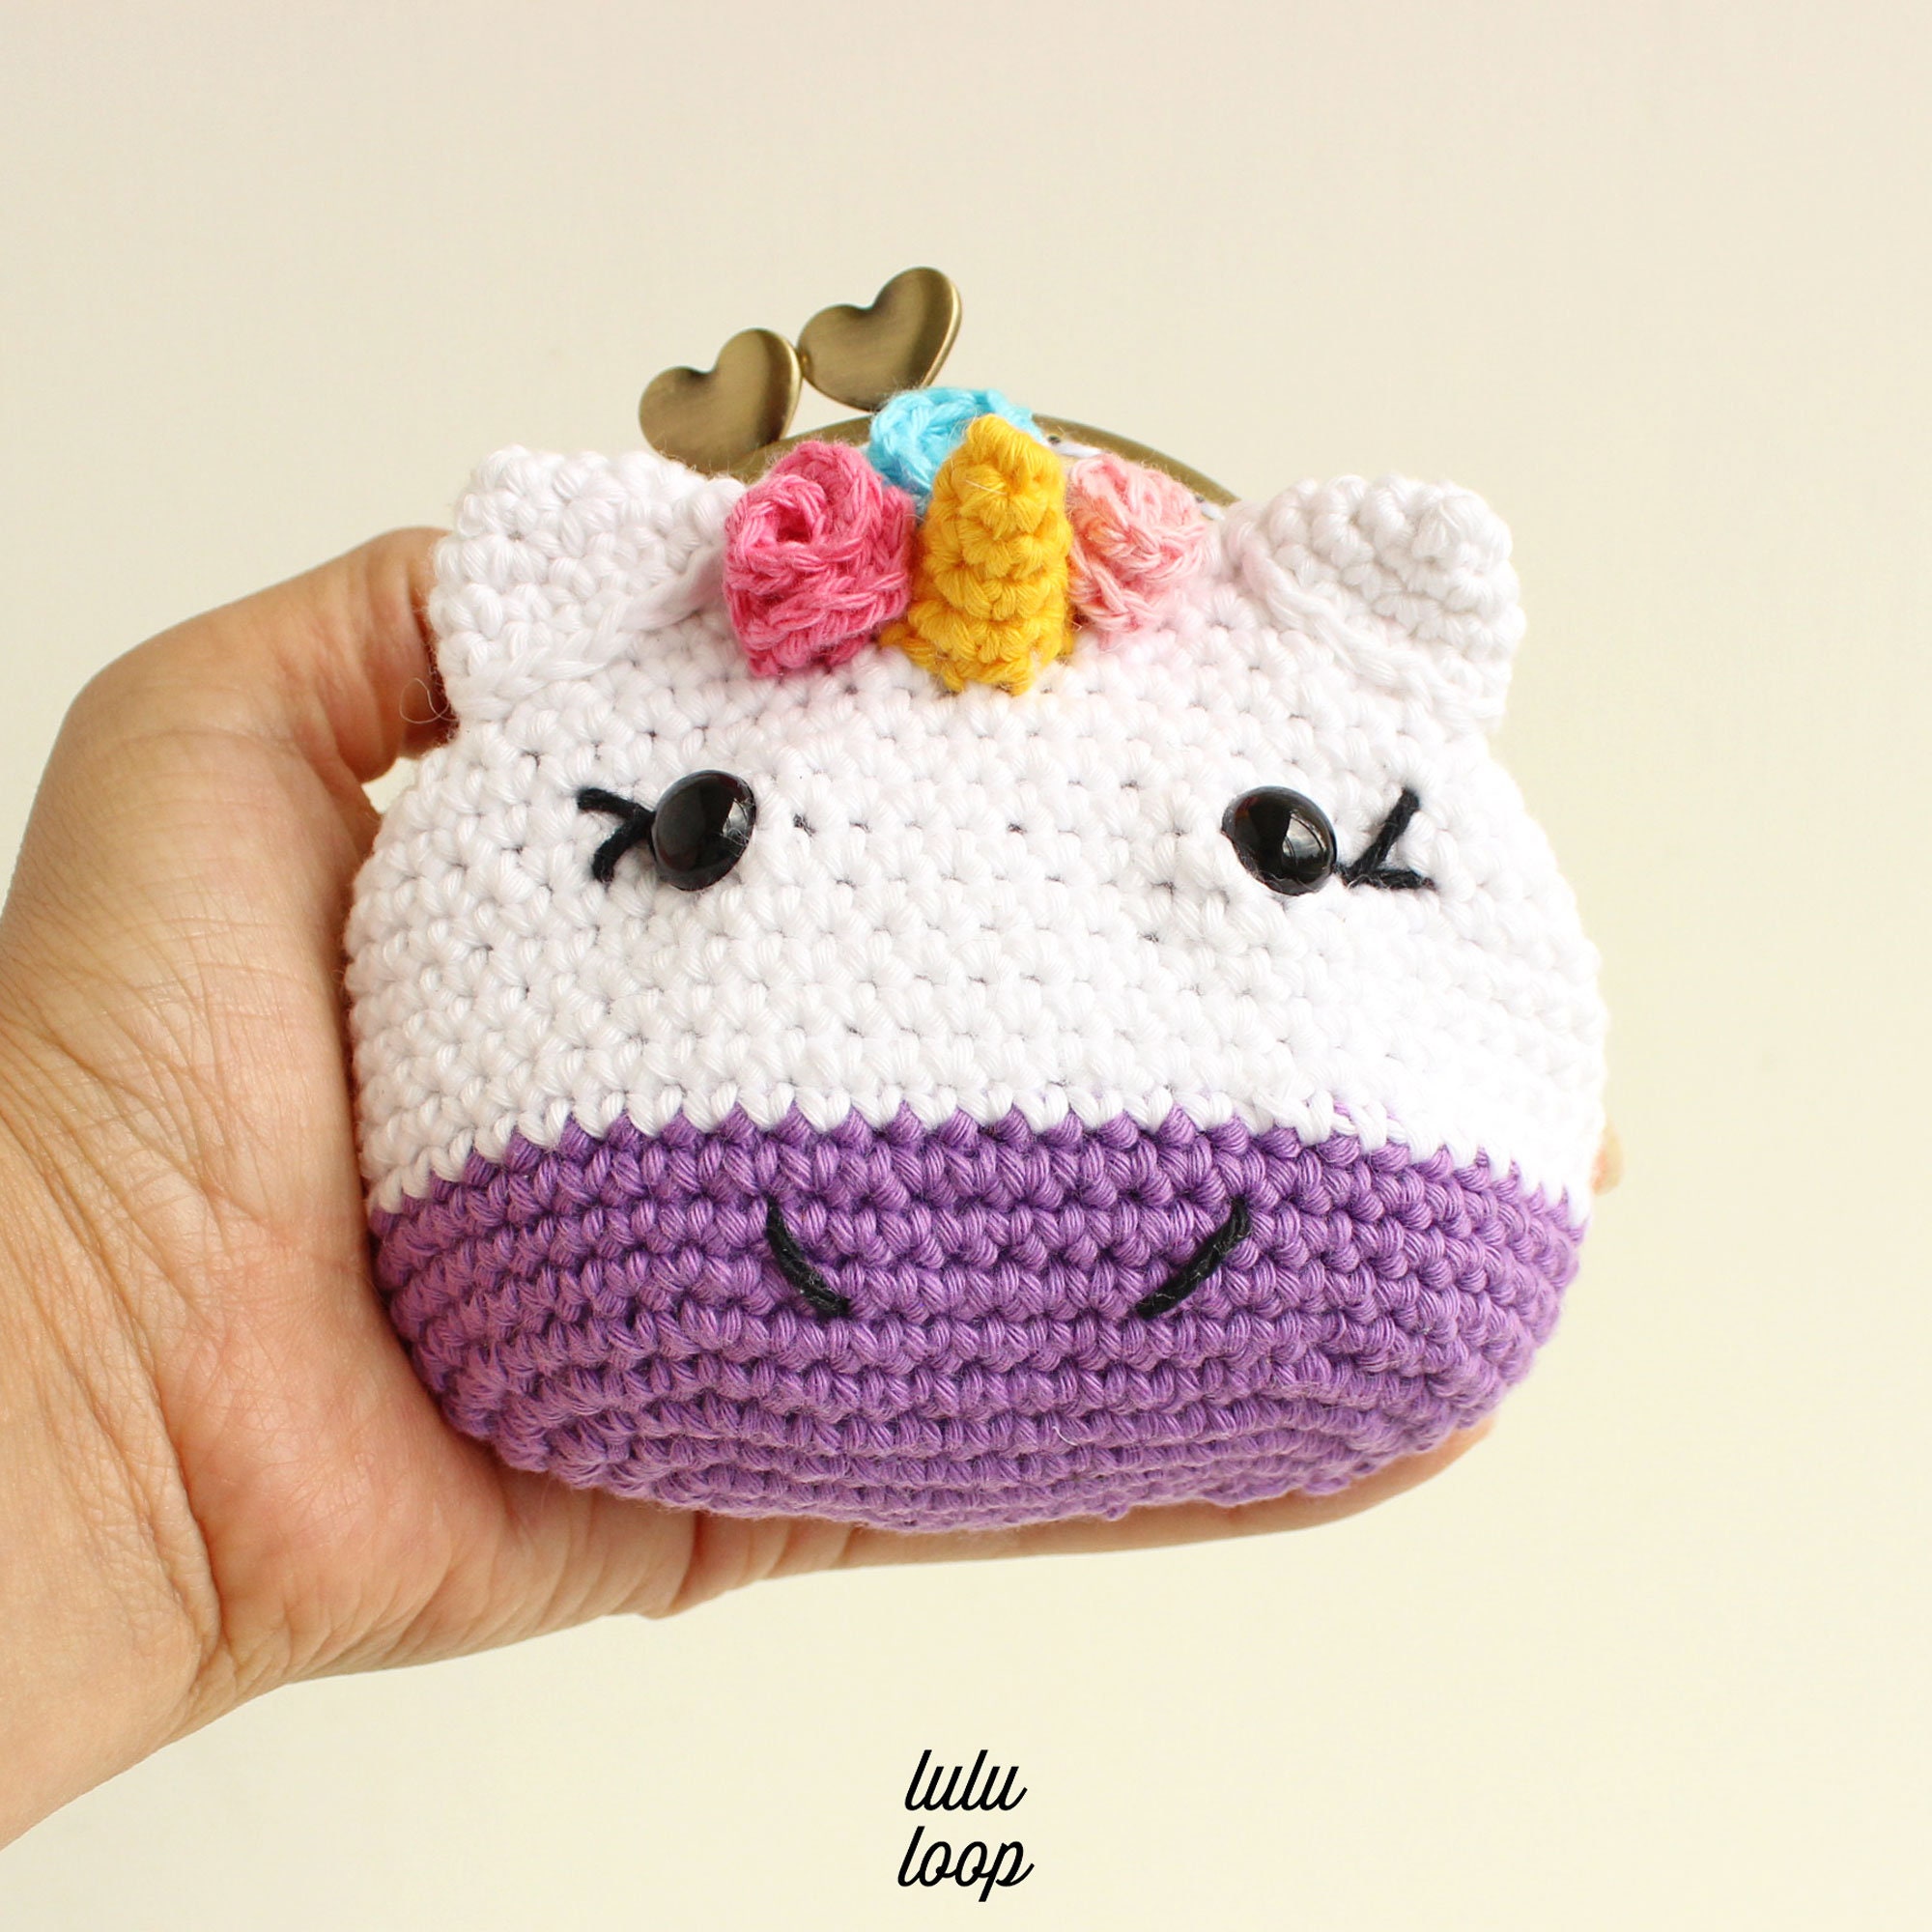 Crochet a Charming Unicorn Purse with this Free Pattern